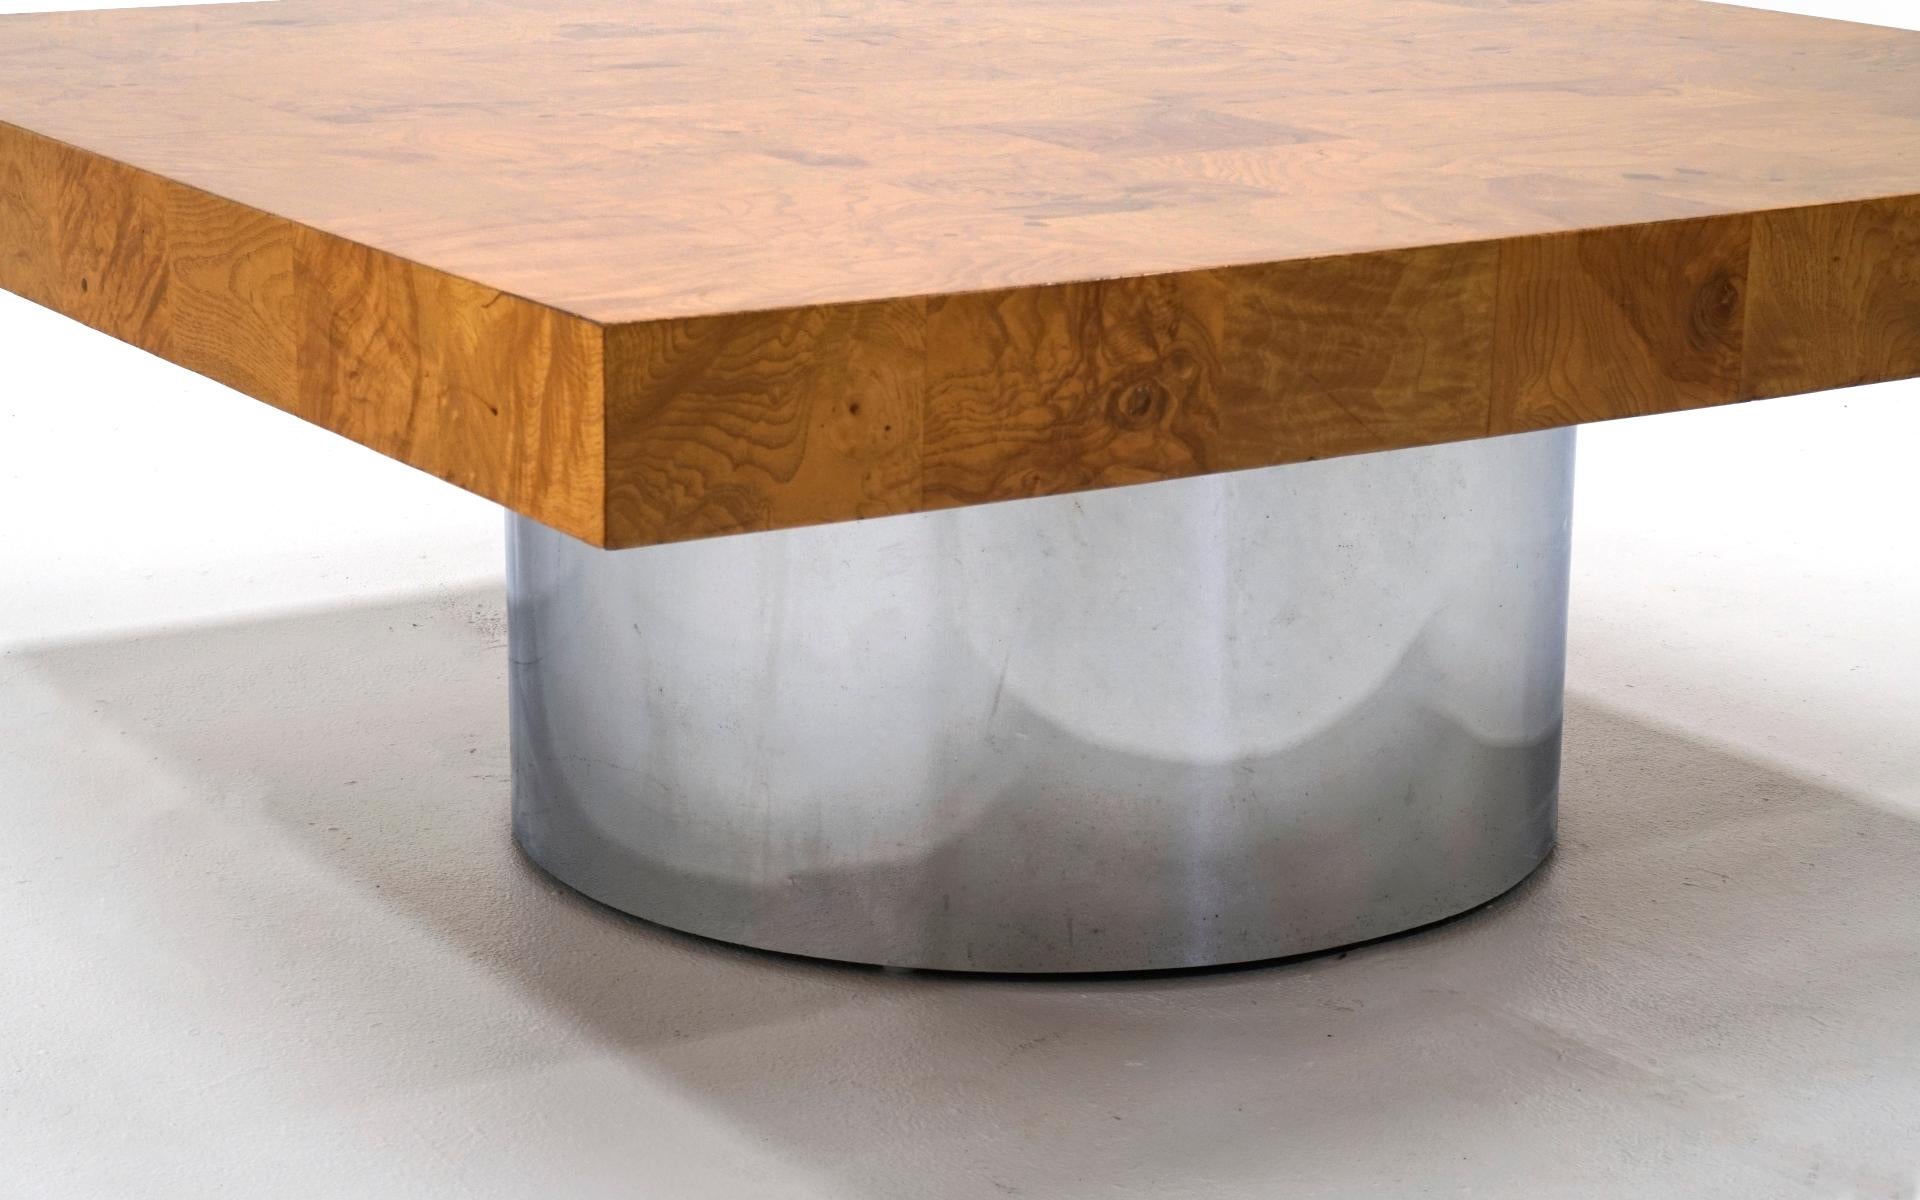 American Burl Wood Square Coffee Table with Round Chrome Pedestal Base by Milo Baughman